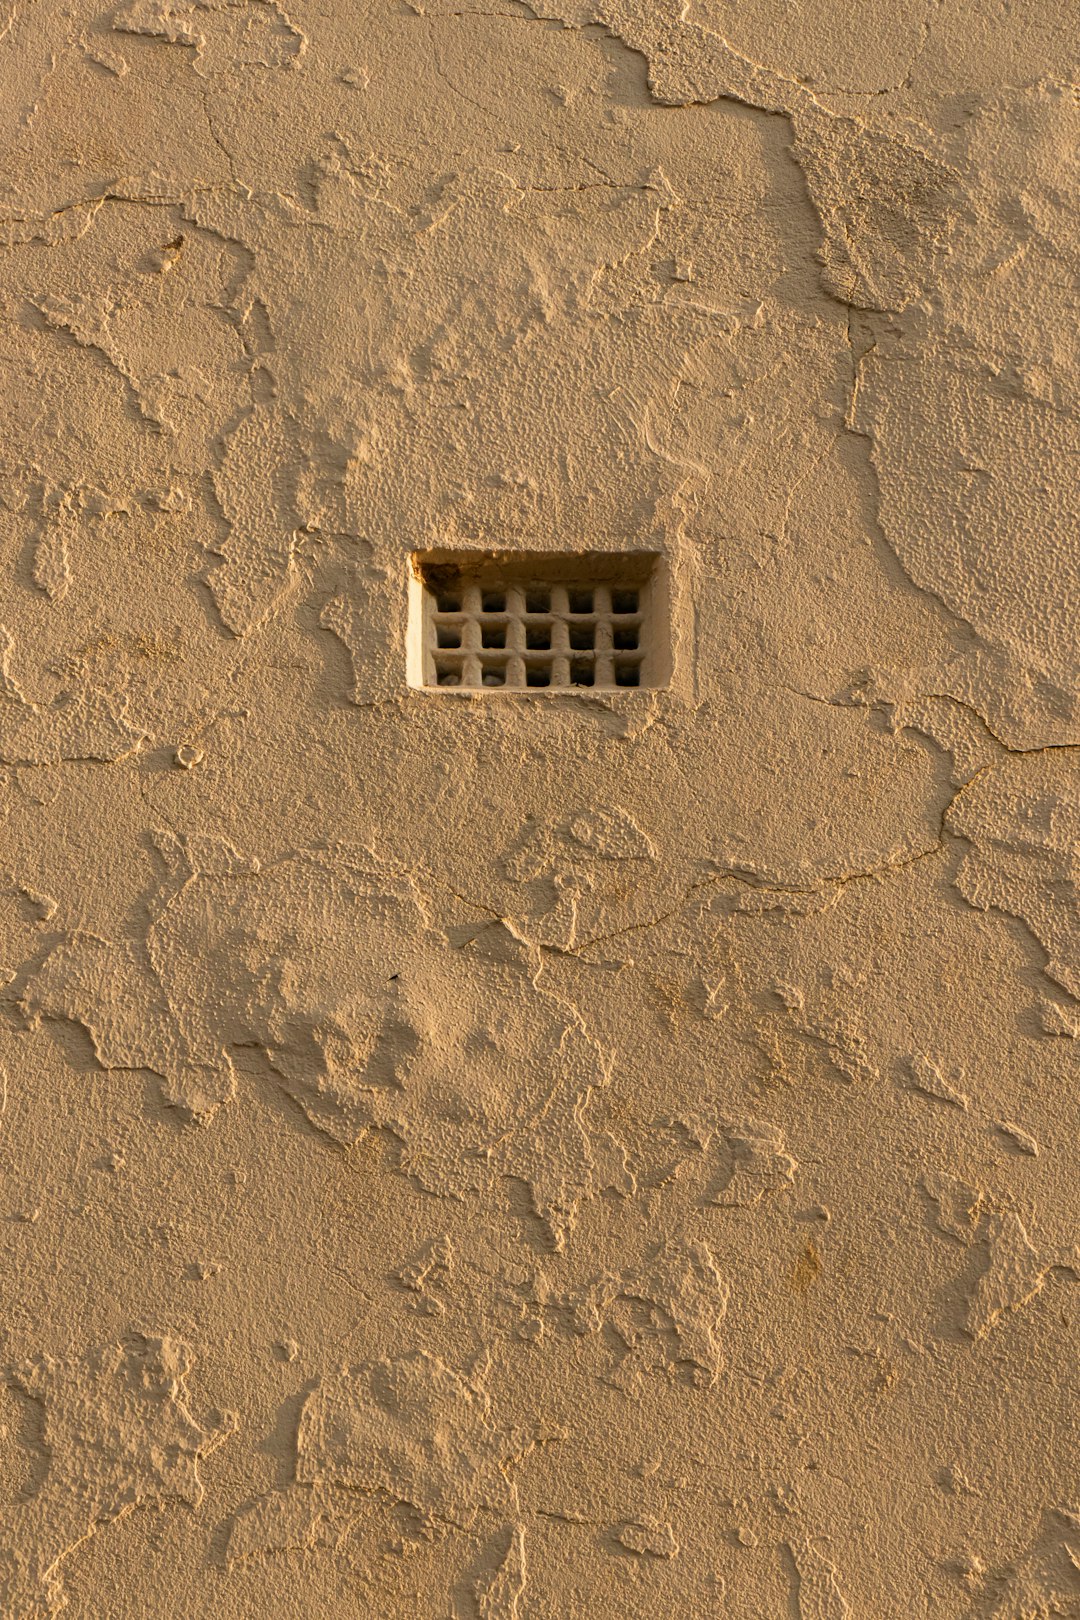 white concrete building on brown sand